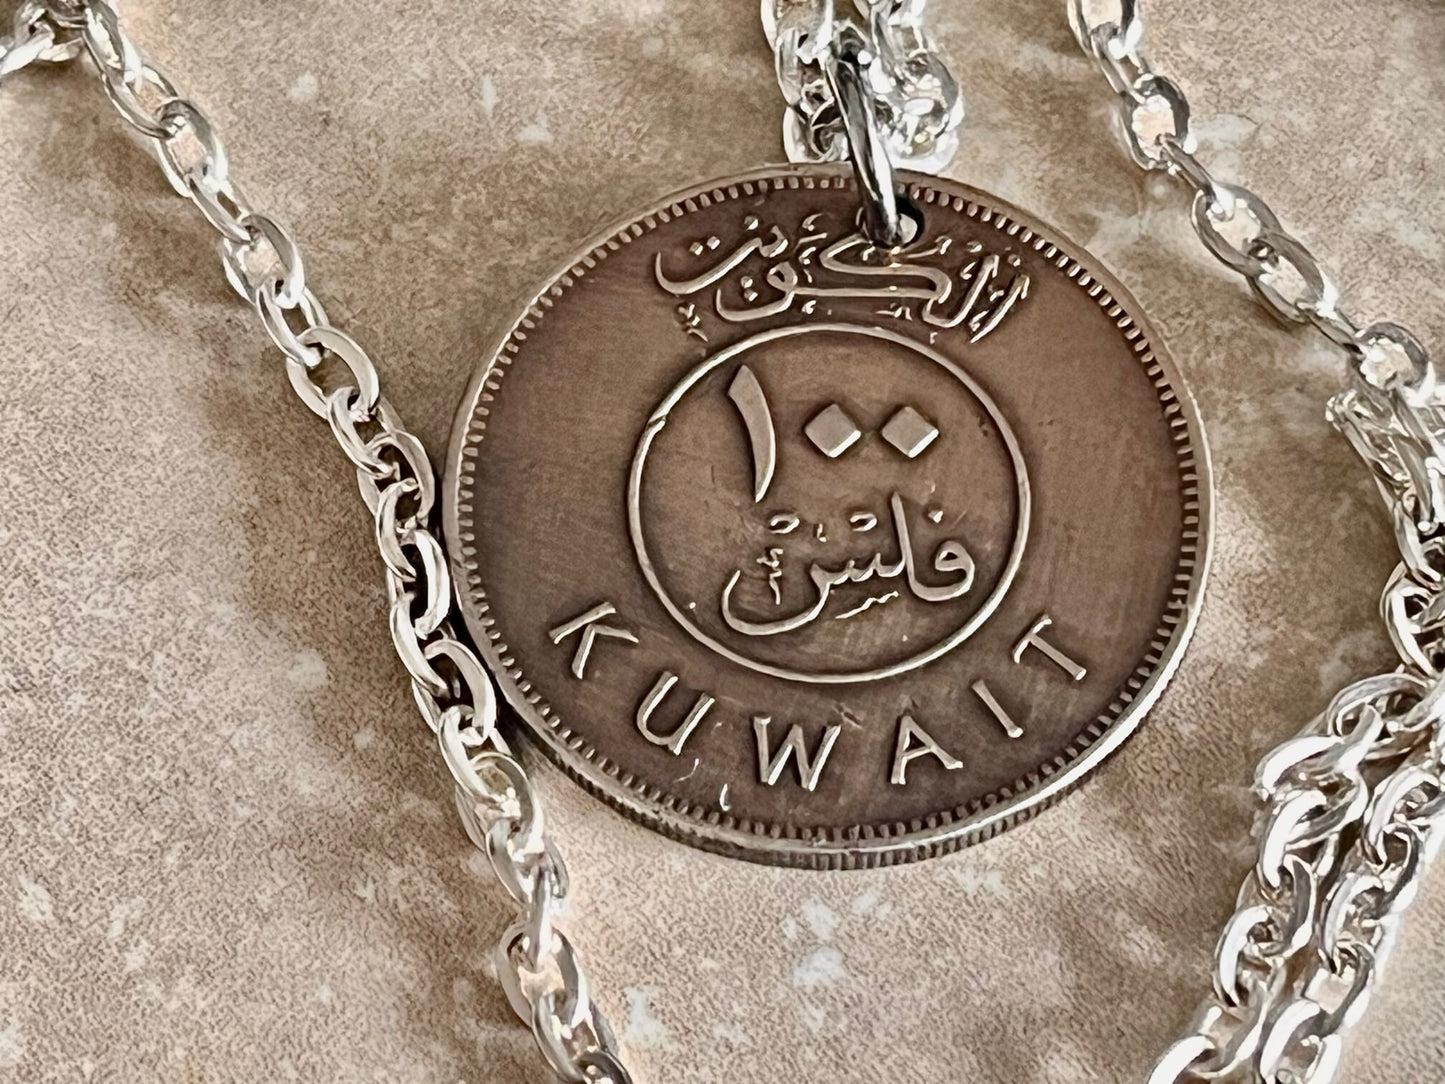 Kuwait Coin Necklace Pendant Kuwaiti 1 Fils Vintage Personal Vintage Handmade Jewelry Gift Friend Charm For Him Her World Coin Collector